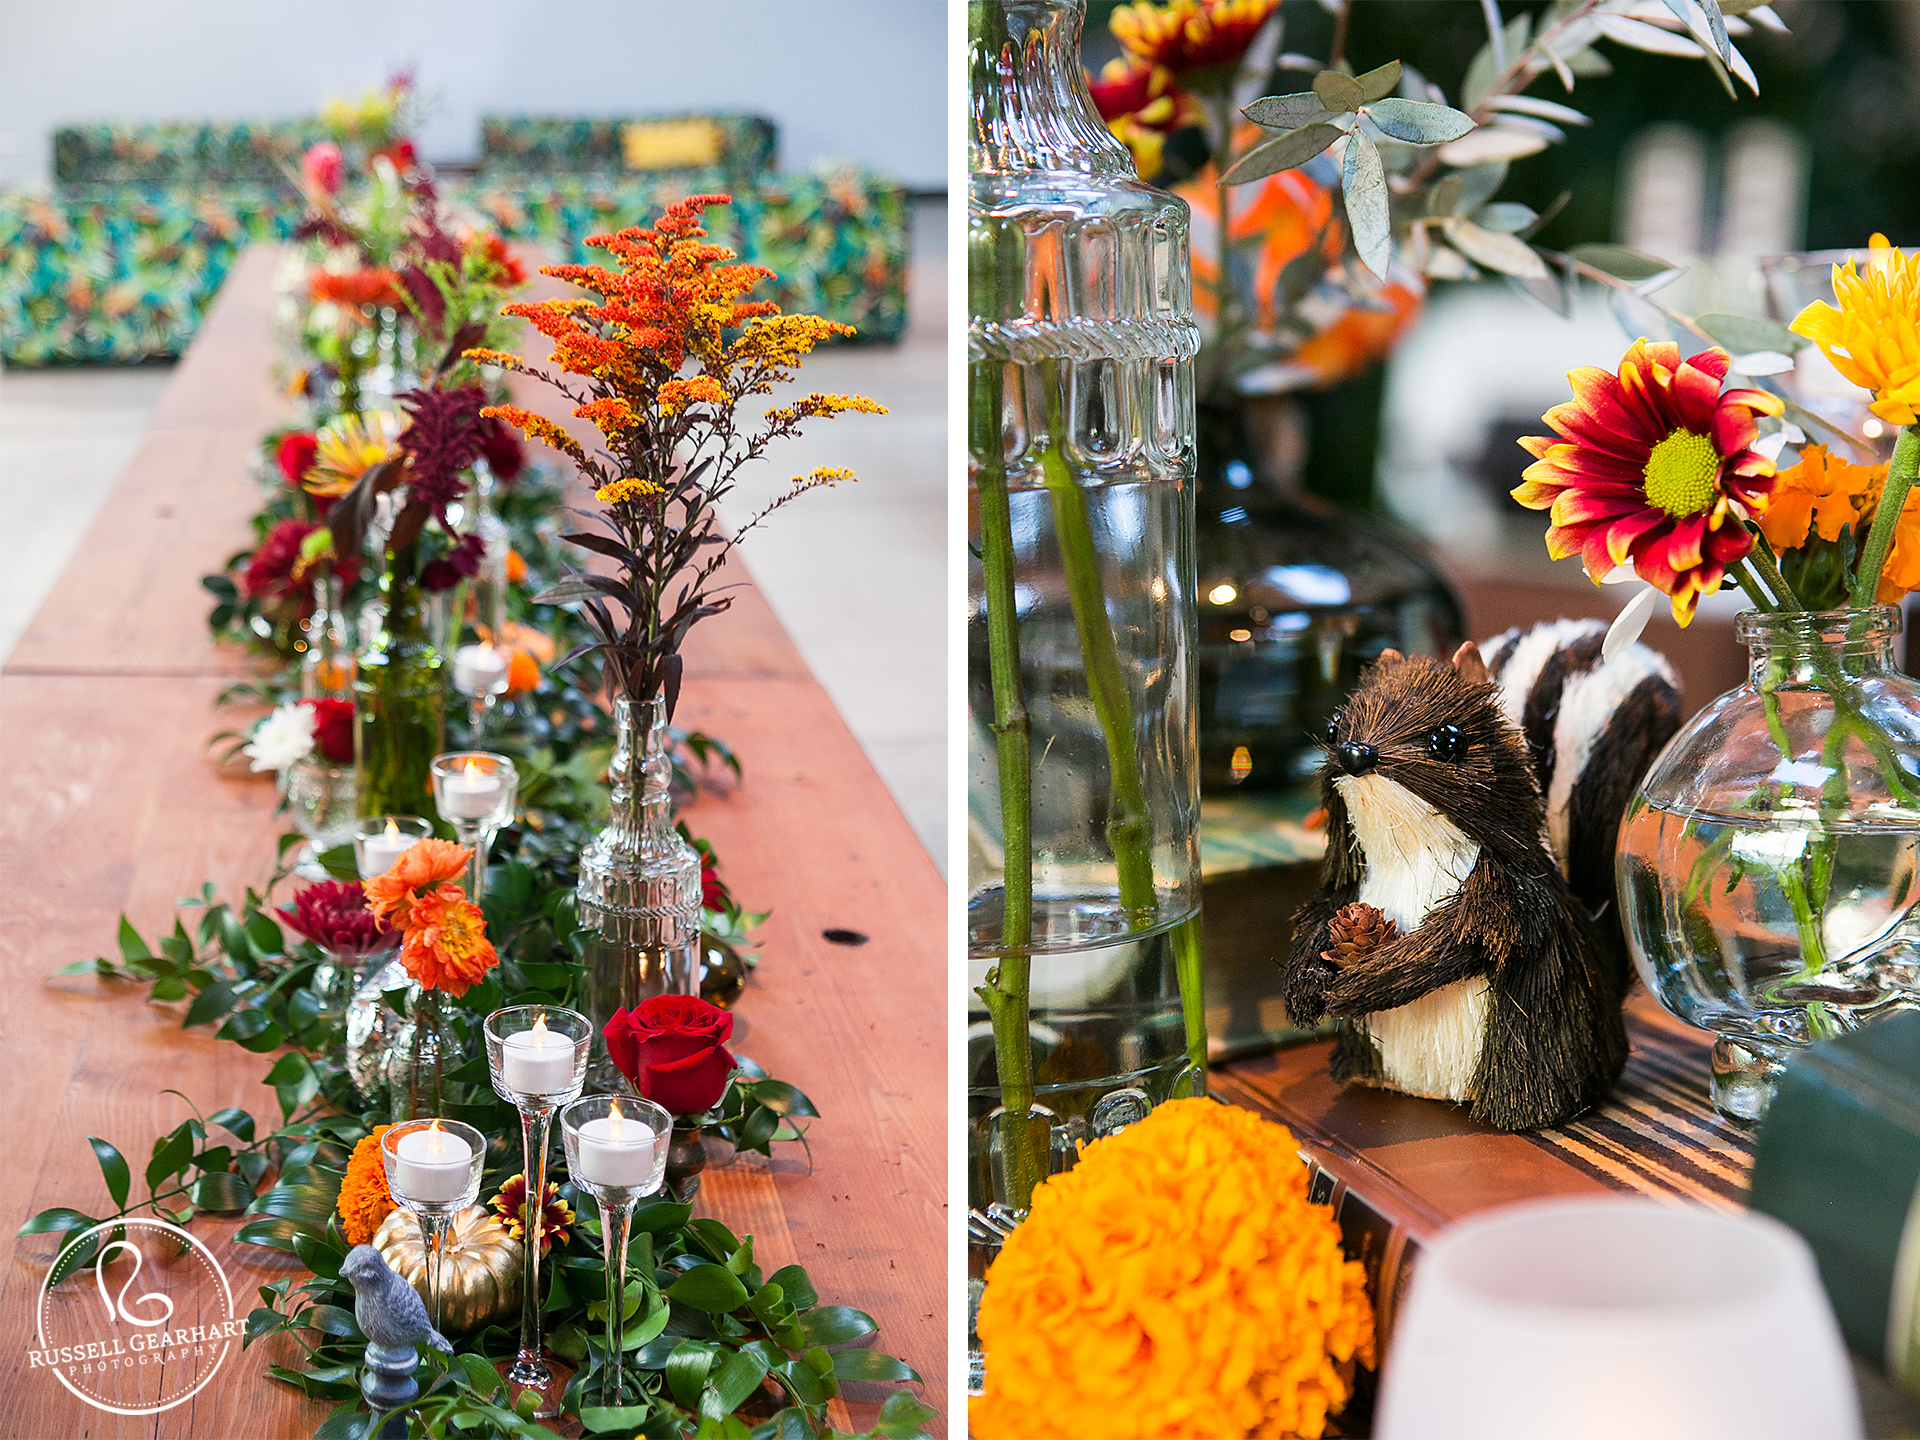 Fall Wedding Reception Table Decorations – Halloween Wedding at the Millwick – www.gearhartphoto.com – Russell Gearhart Photography